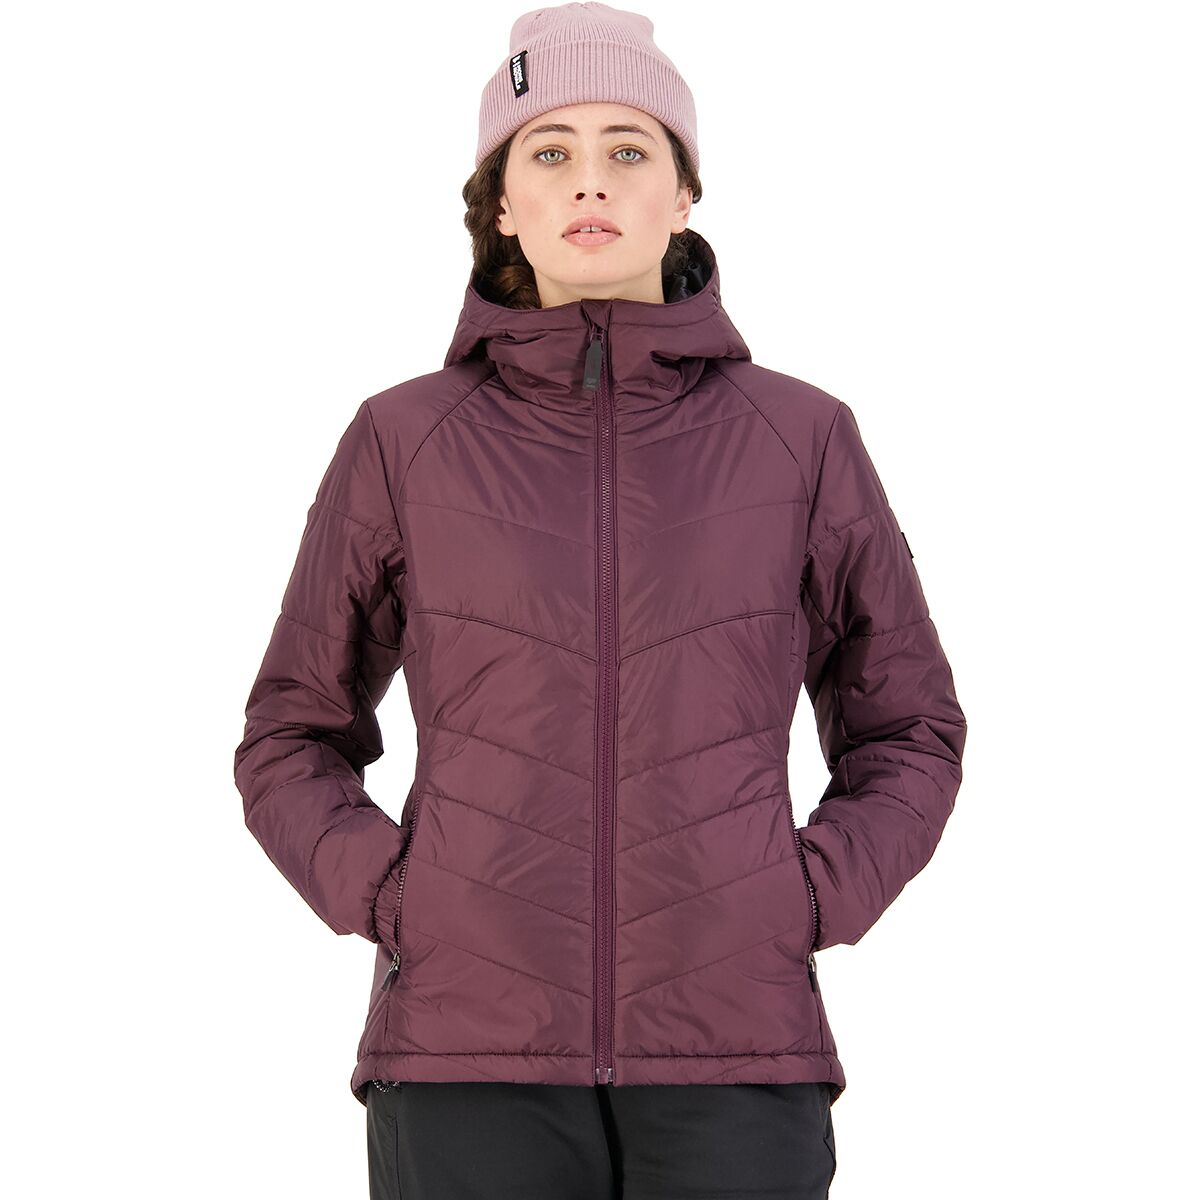 Mons Royale Nordkette Insulated Hooded Jacket - Women's